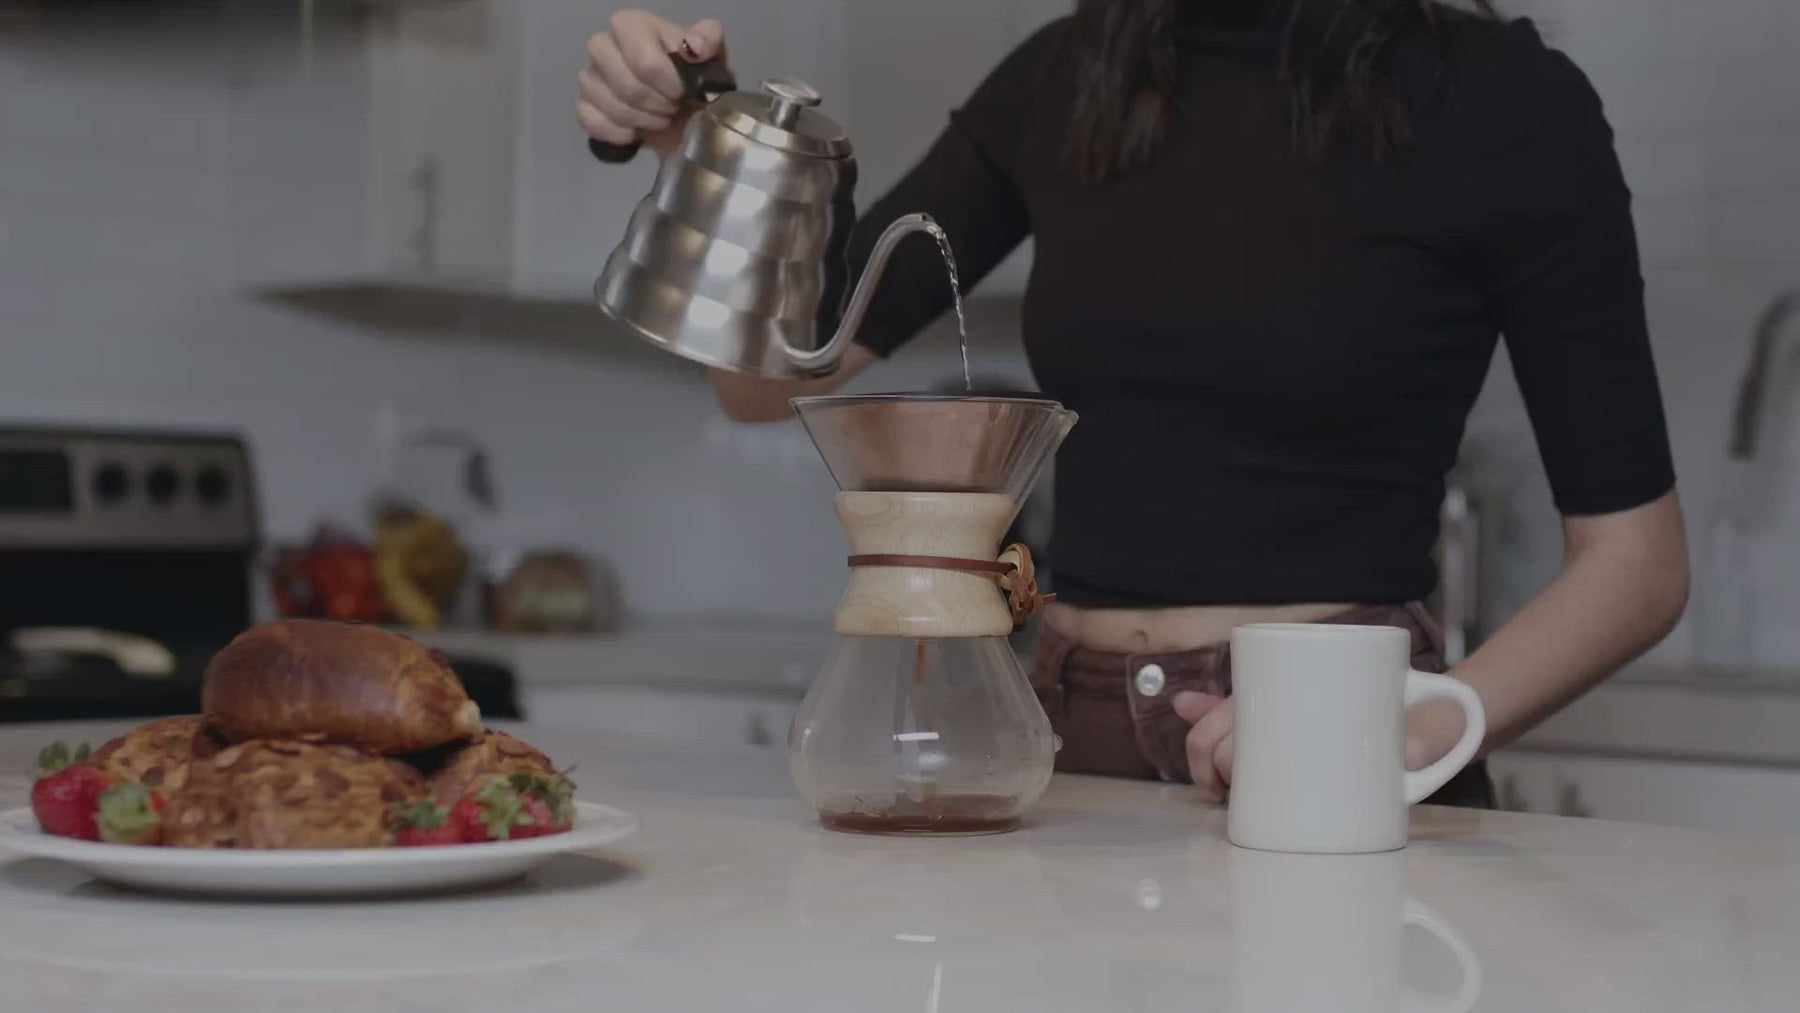 Pour Over Gooseneck Coffee Kettle with Thermometer by Barista Warrior –  Nossa Familia Coffee